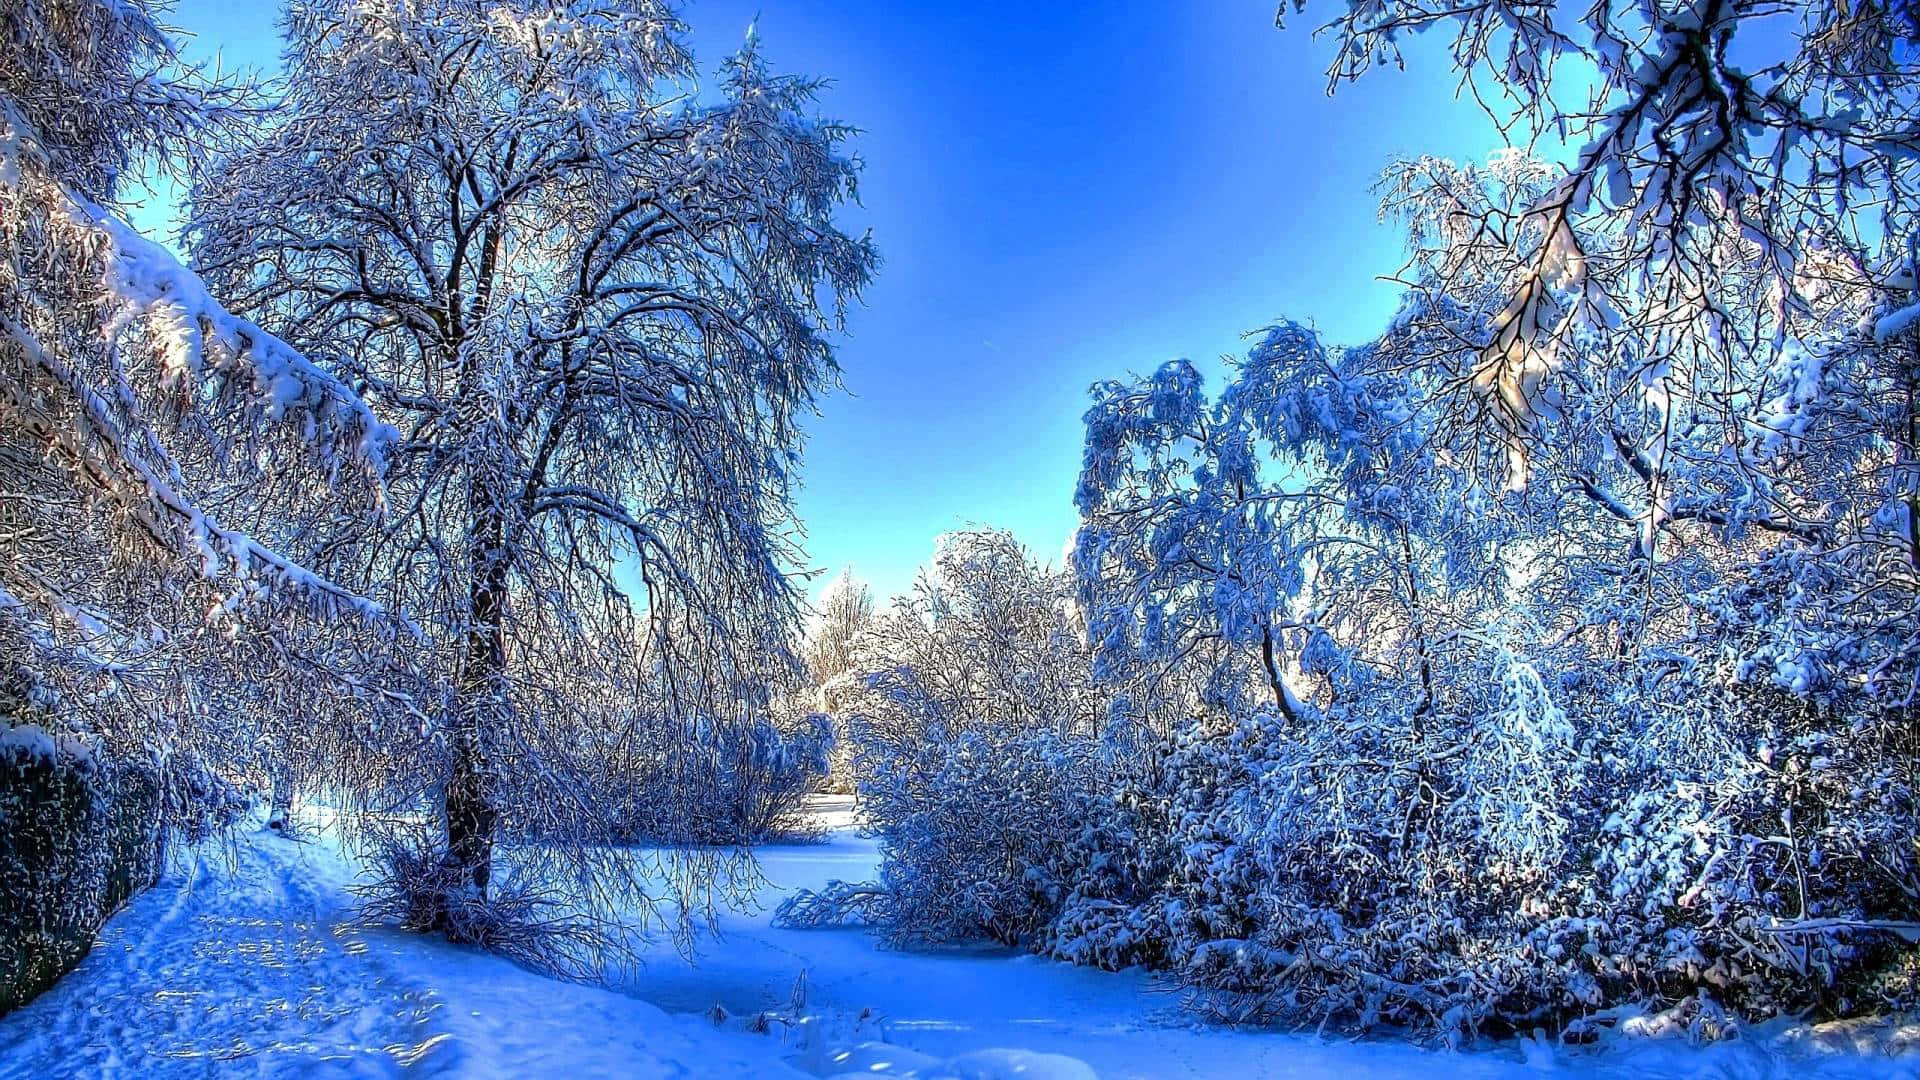 Grab Your Laptop and Enjoy the Winter Wallpaper